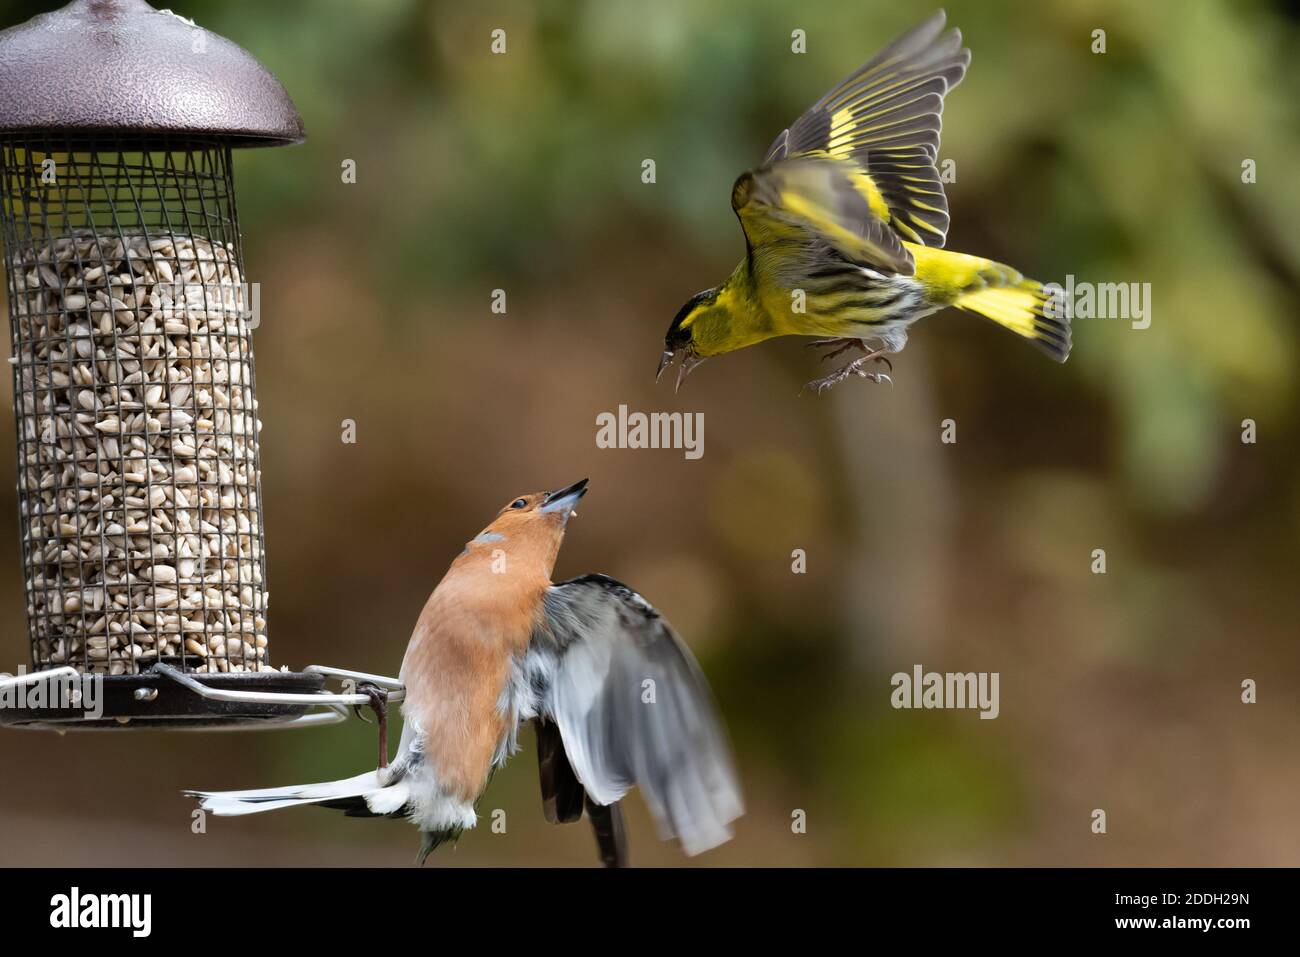 Siskin and Chaffinch Fighting on a Bird Feeder 002 Stock Photo